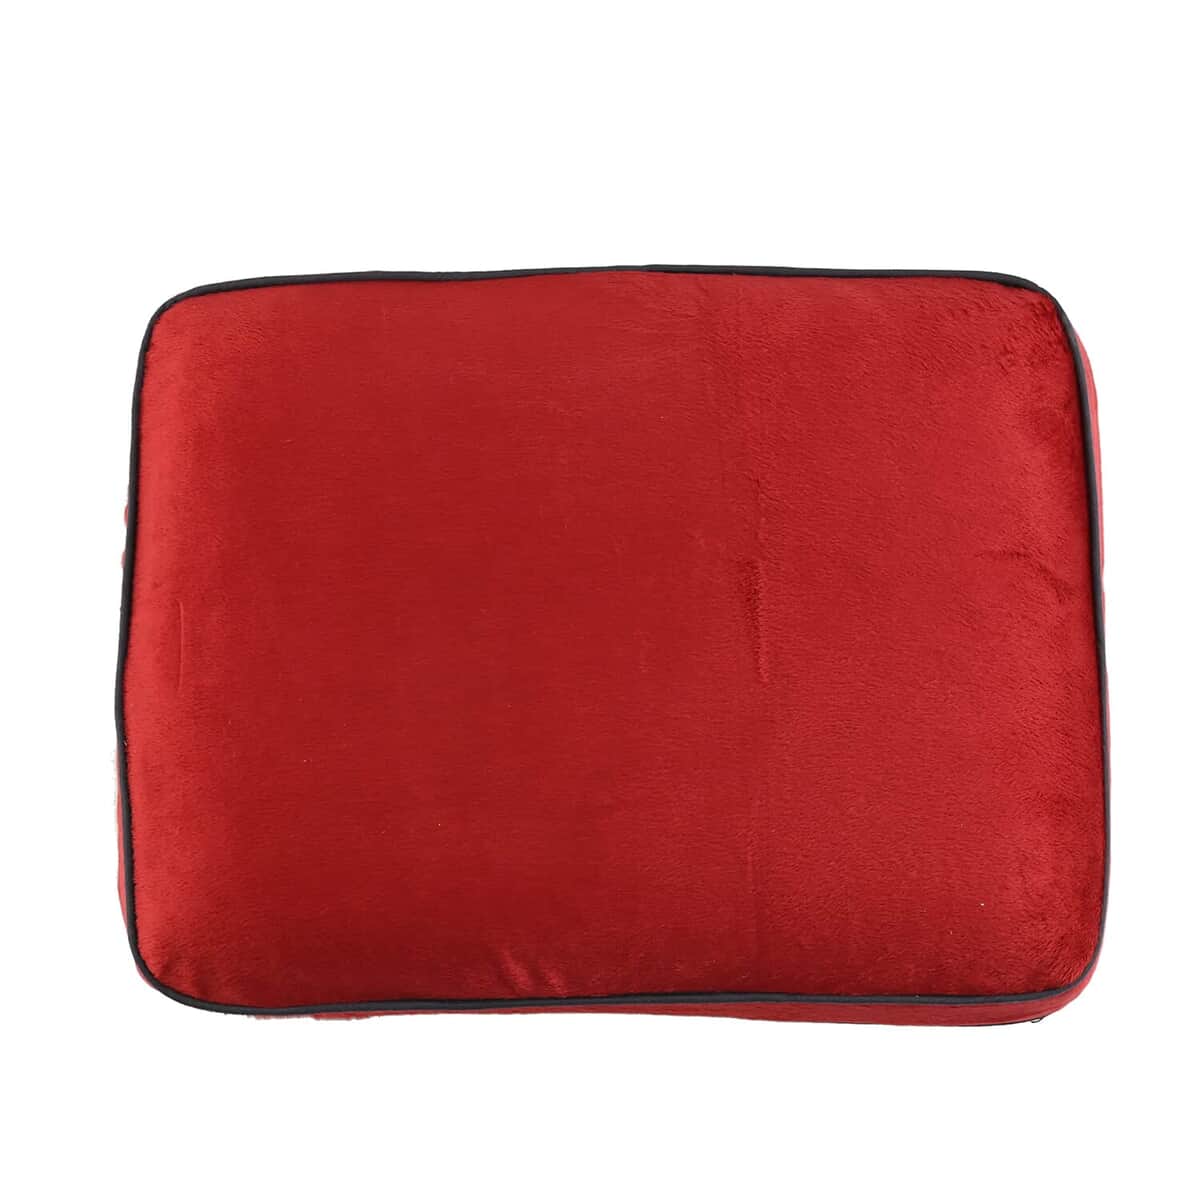 Bon Voyage Memory Foam Square Pillow with Buckle - Red, Square Cushion Insert for Chair Car Sofa Bed, Backrest Cushion, Lower Back Support And Pain Relief Seat Cushion image number 5